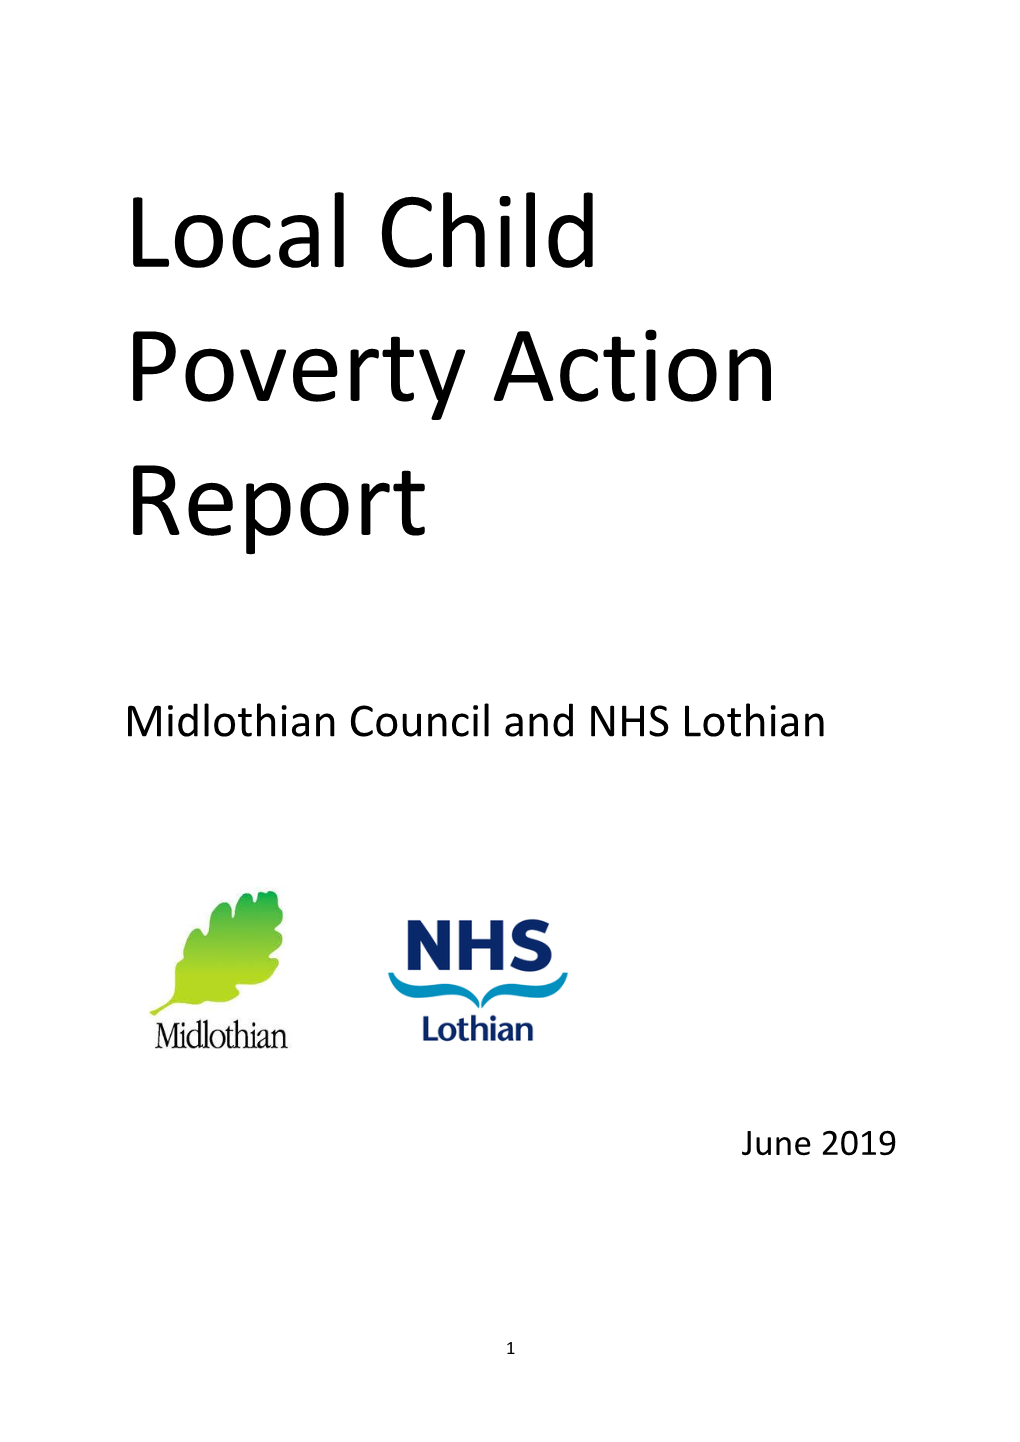 Local Child Poverty Action Report